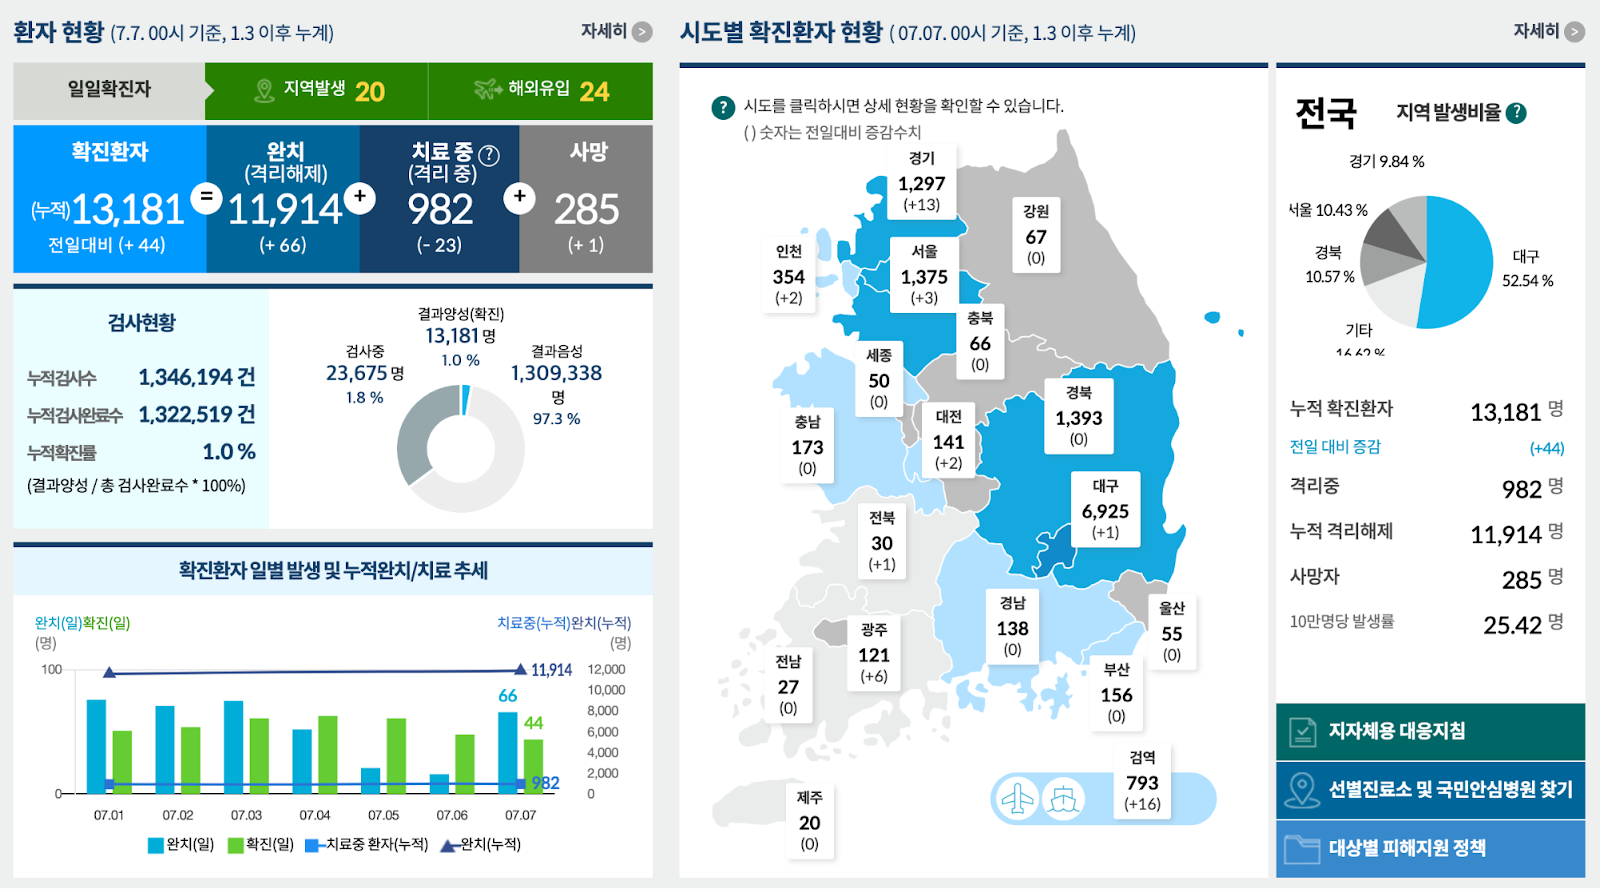 Screenshot of COVID-19 data from the Korea Disease Control and Prevention Agency.